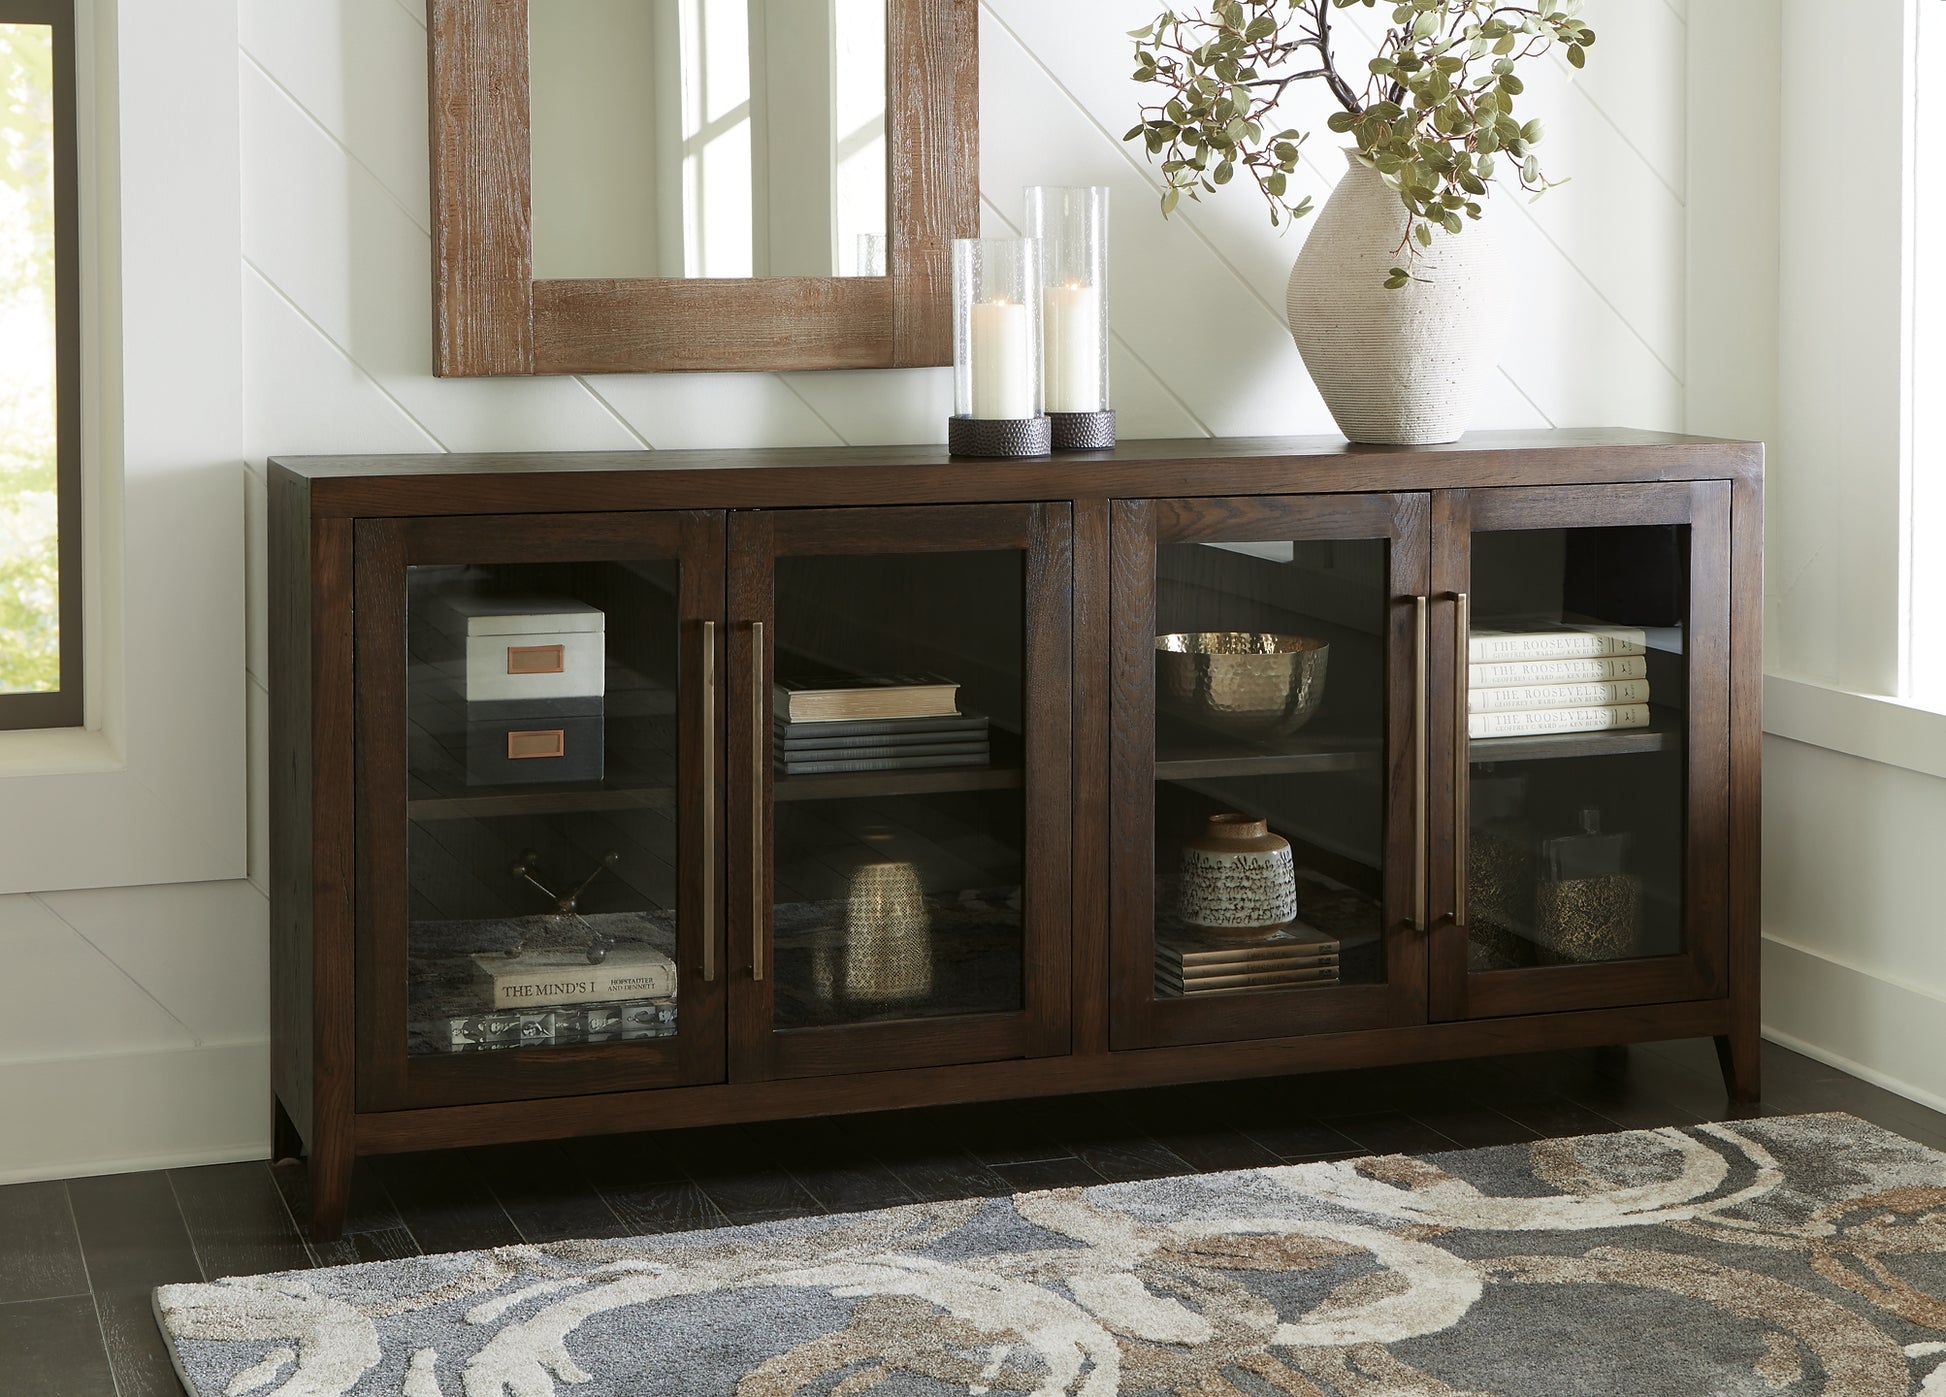 Balintmore Accent Cabinet JB's Furniture  Home Furniture, Home Decor, Furniture Store